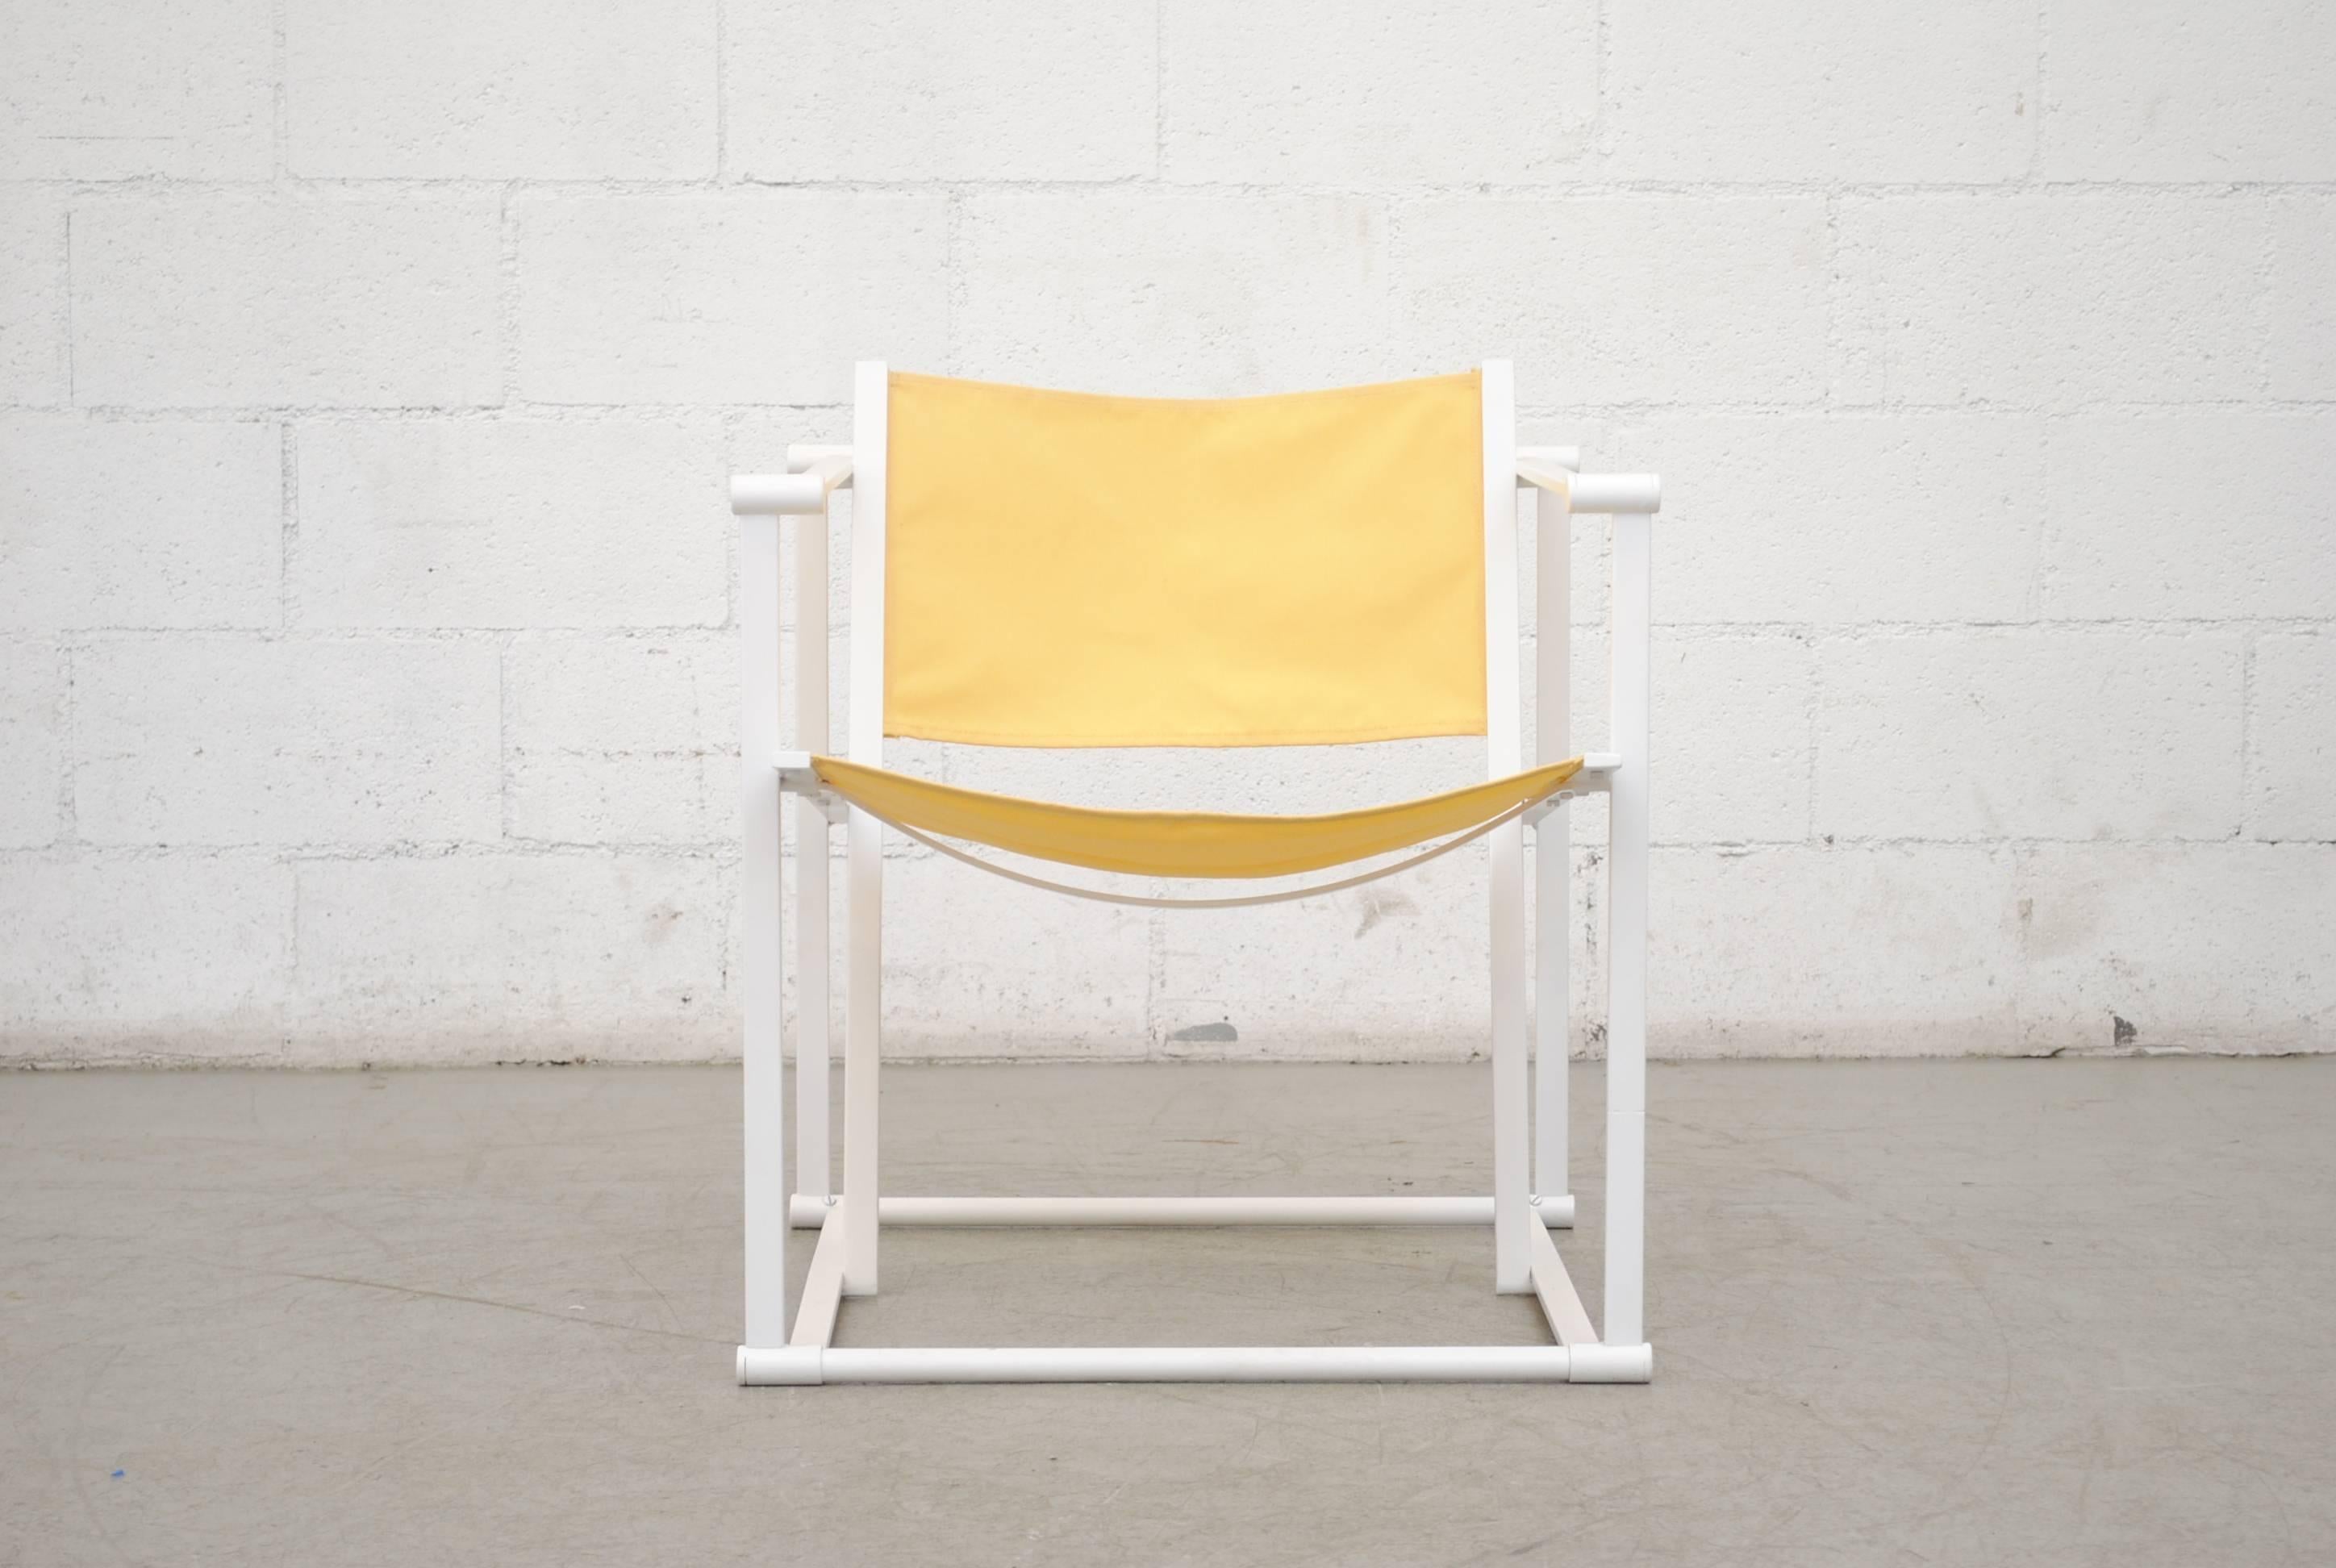 UMS Pastoe FM60, cubic chair lounge chair, designed in 1980 by Radboud van Beekum. White enameled steel frame with newly upholstered yellow canvas seating. Frame is in original condition with some wear to enamel.